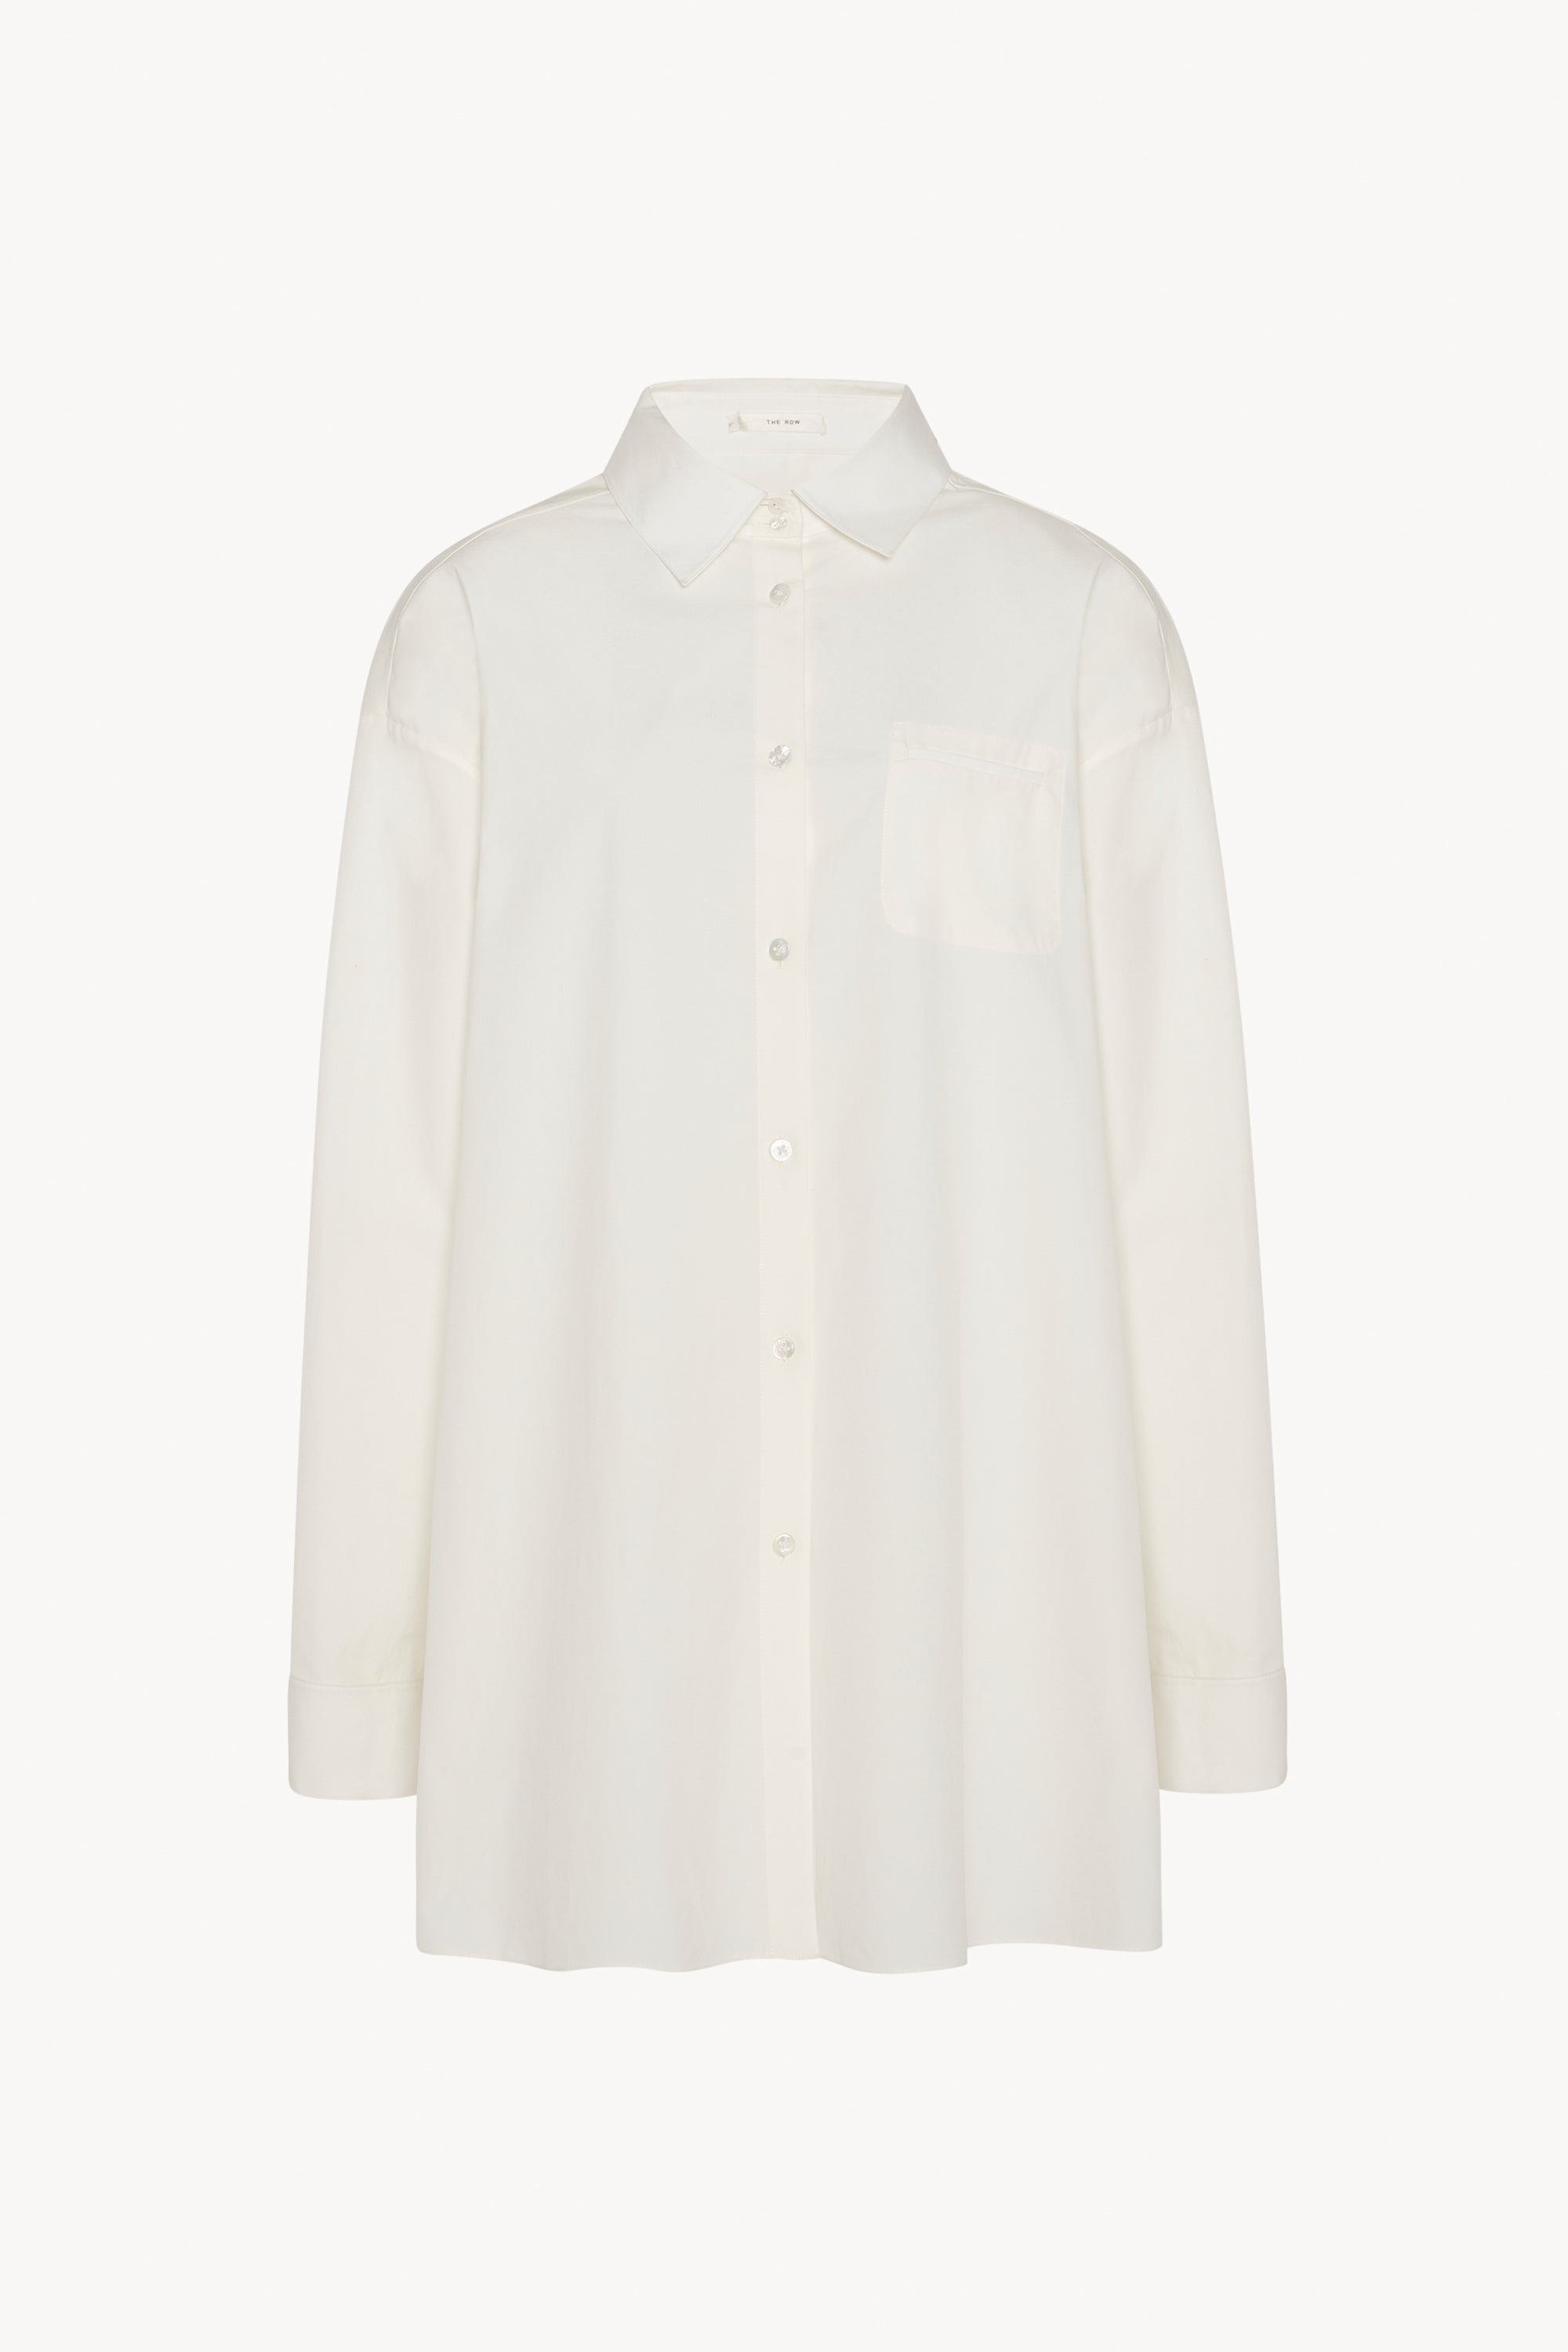 Moon Shirt White in Cotton – The Row